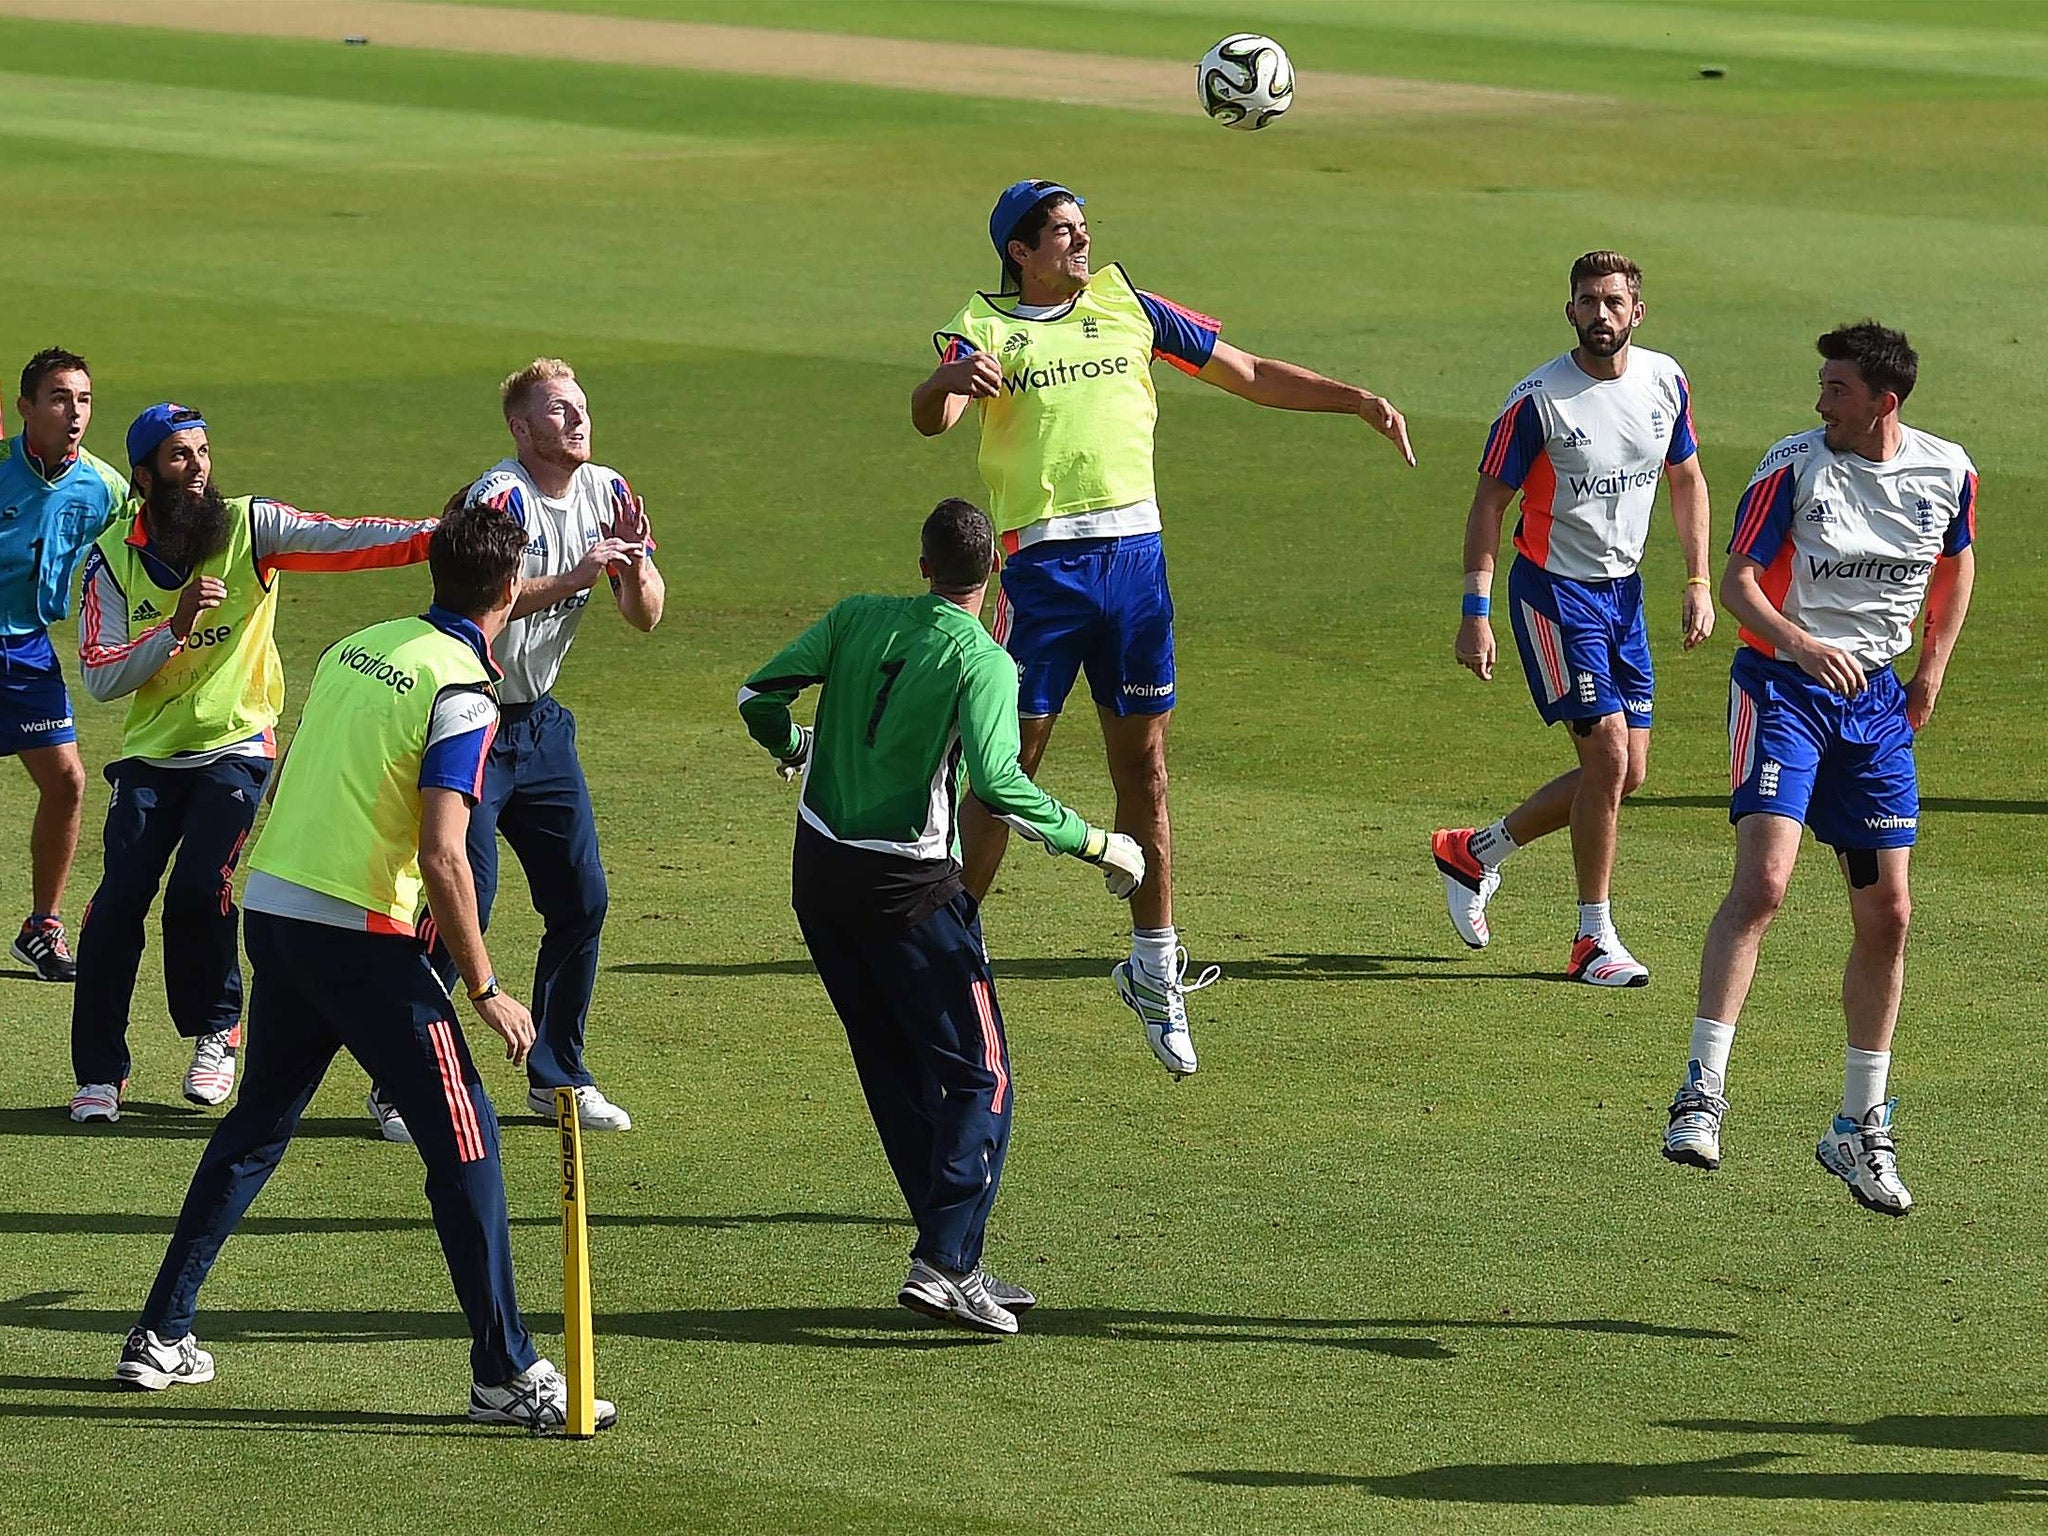 England captain Alastair Cook rises highest to head a football in training at Trent Bridge